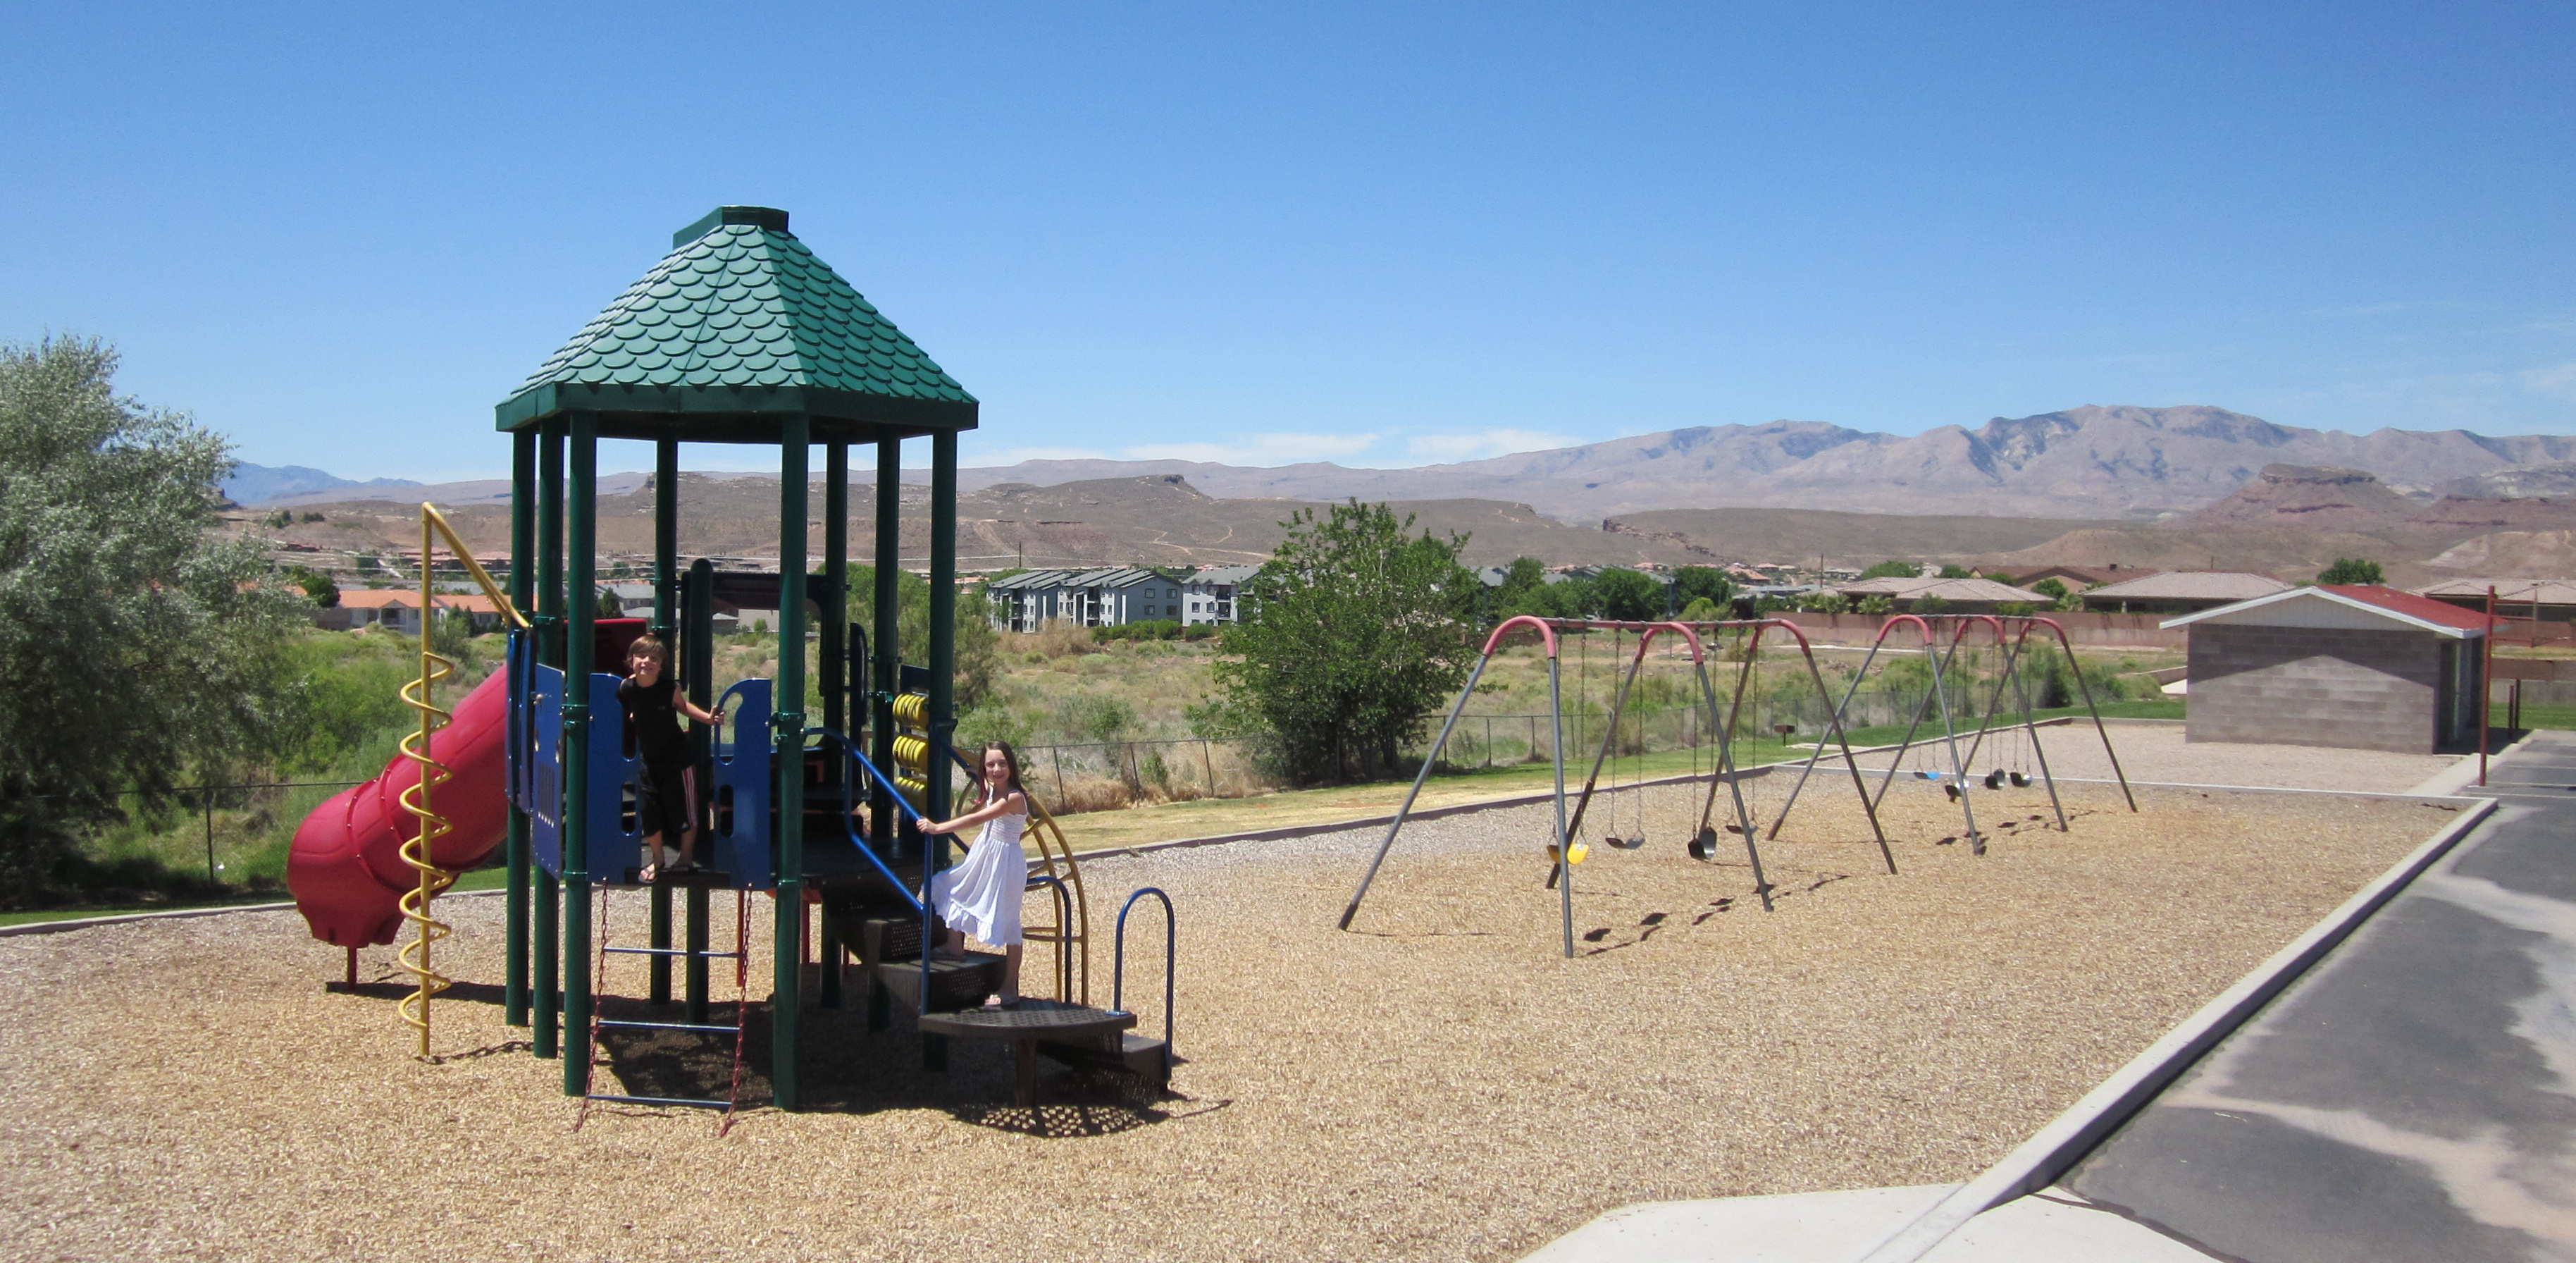 Play set, swings, and maintenance shed at Sunset Elementary School